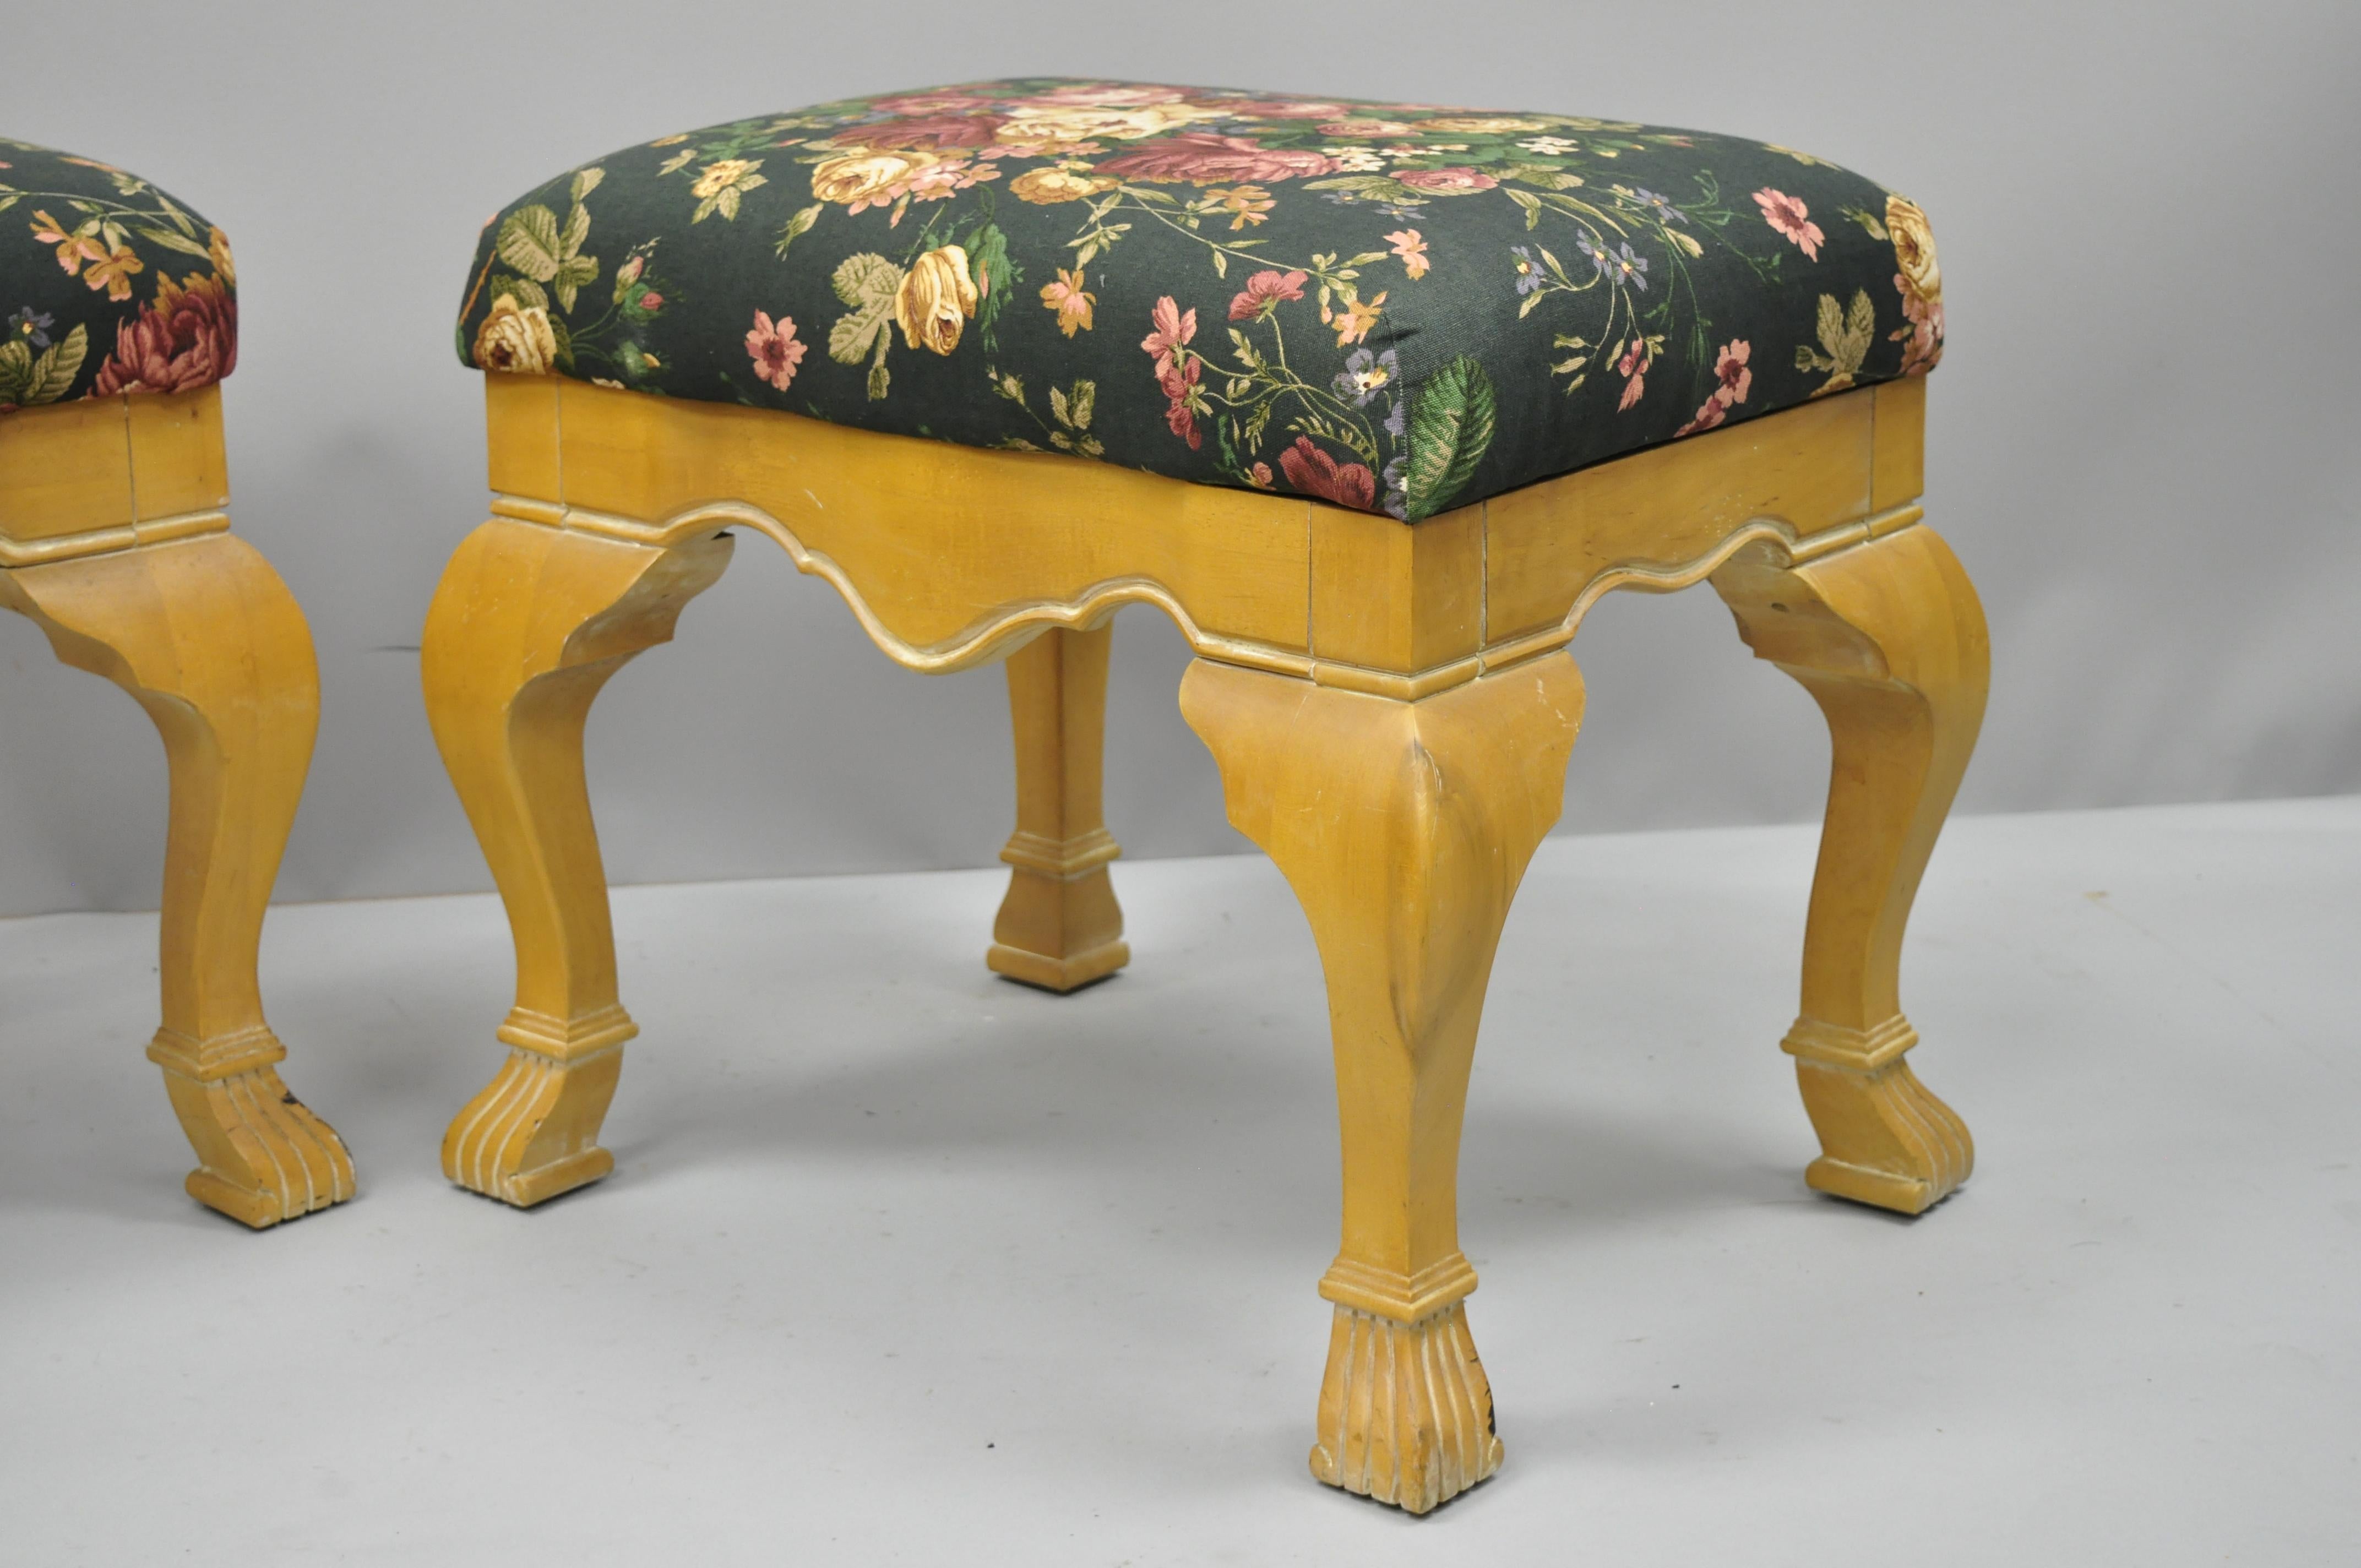 20th Century Pair of Country French Style Cabriole Leg Hoof Foot Upholstered Stools Benches